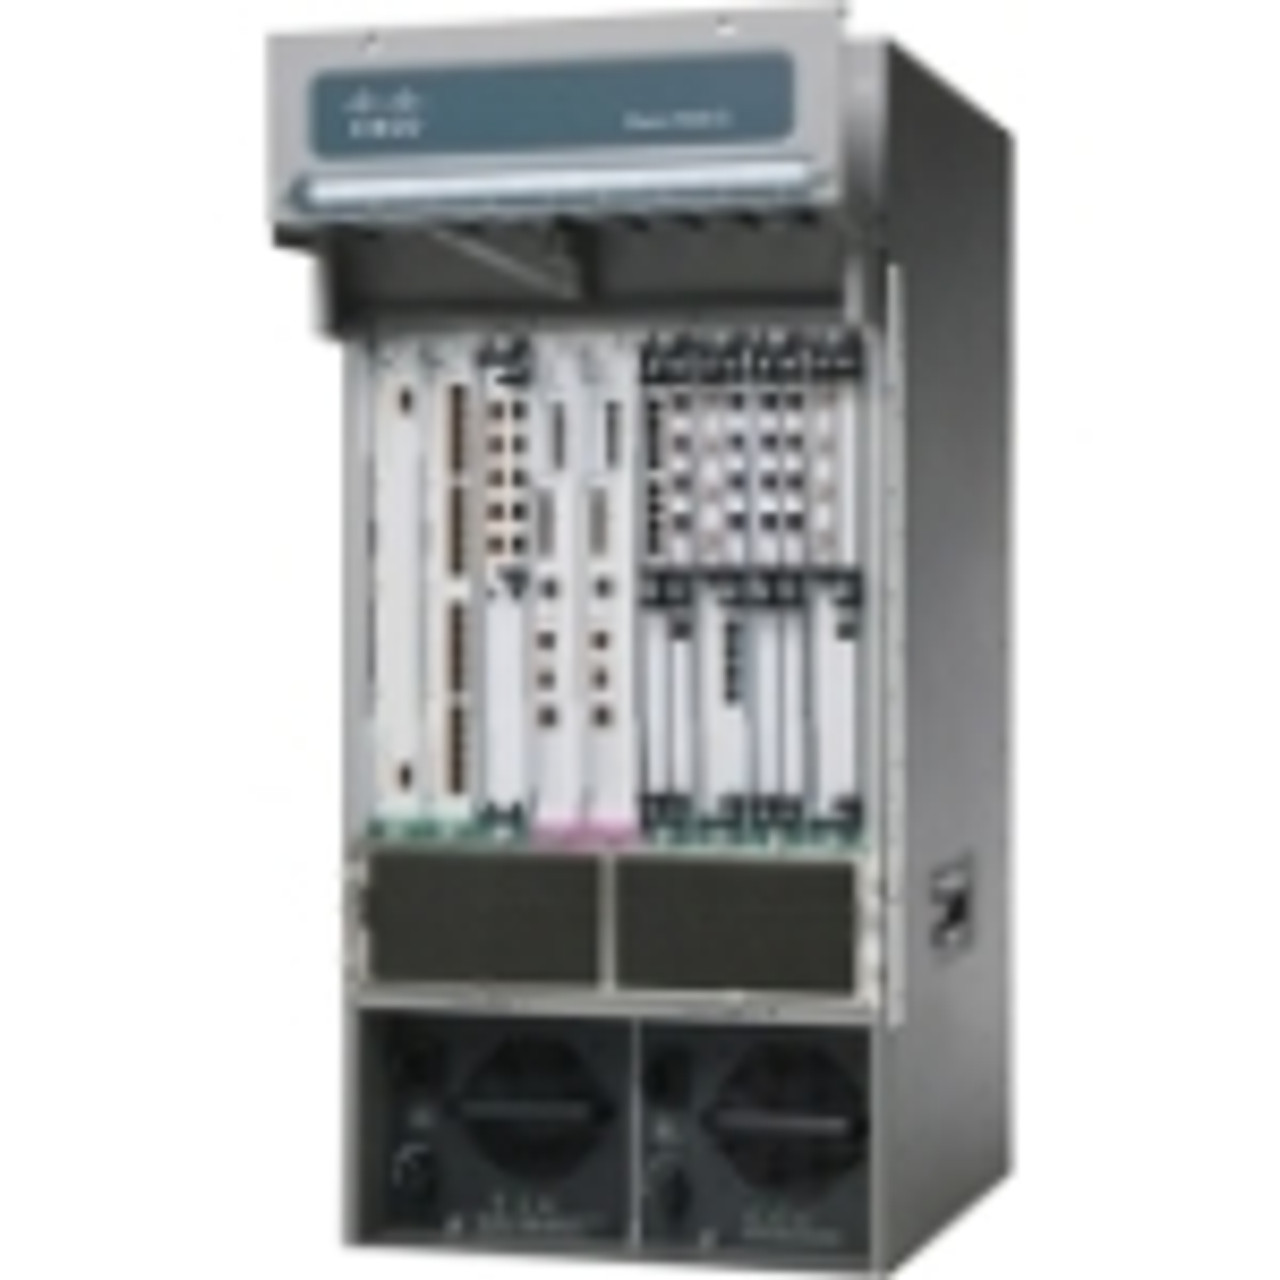 7609S-RSP7XL-10G-P Cisco 7609-S Router Chassis 9 Slots 21U Rack-mountable (Refurbished)